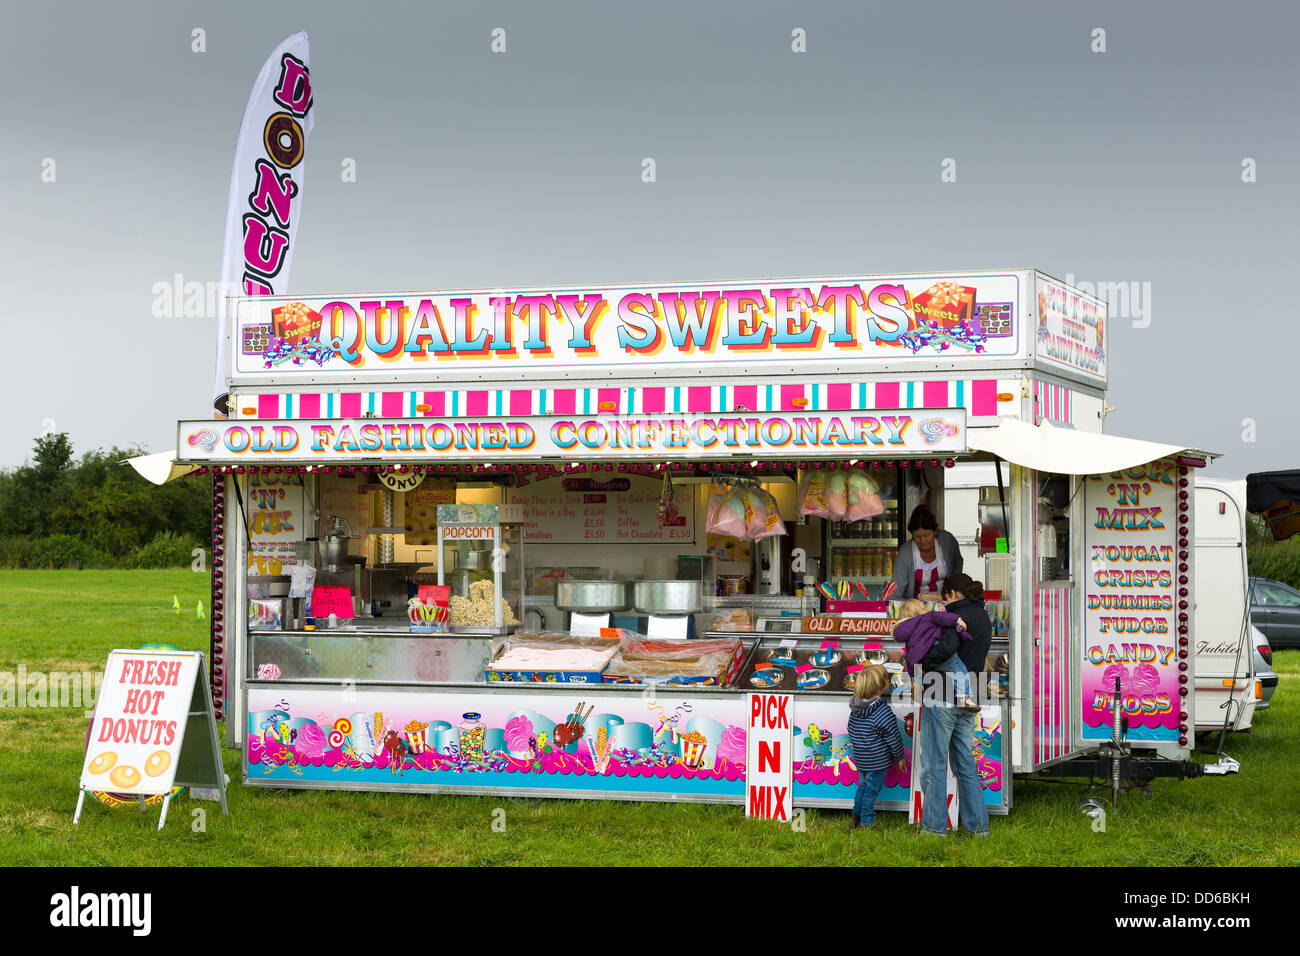 Quality Sweets - Mobile Confectionery Shop in England Stock Photo